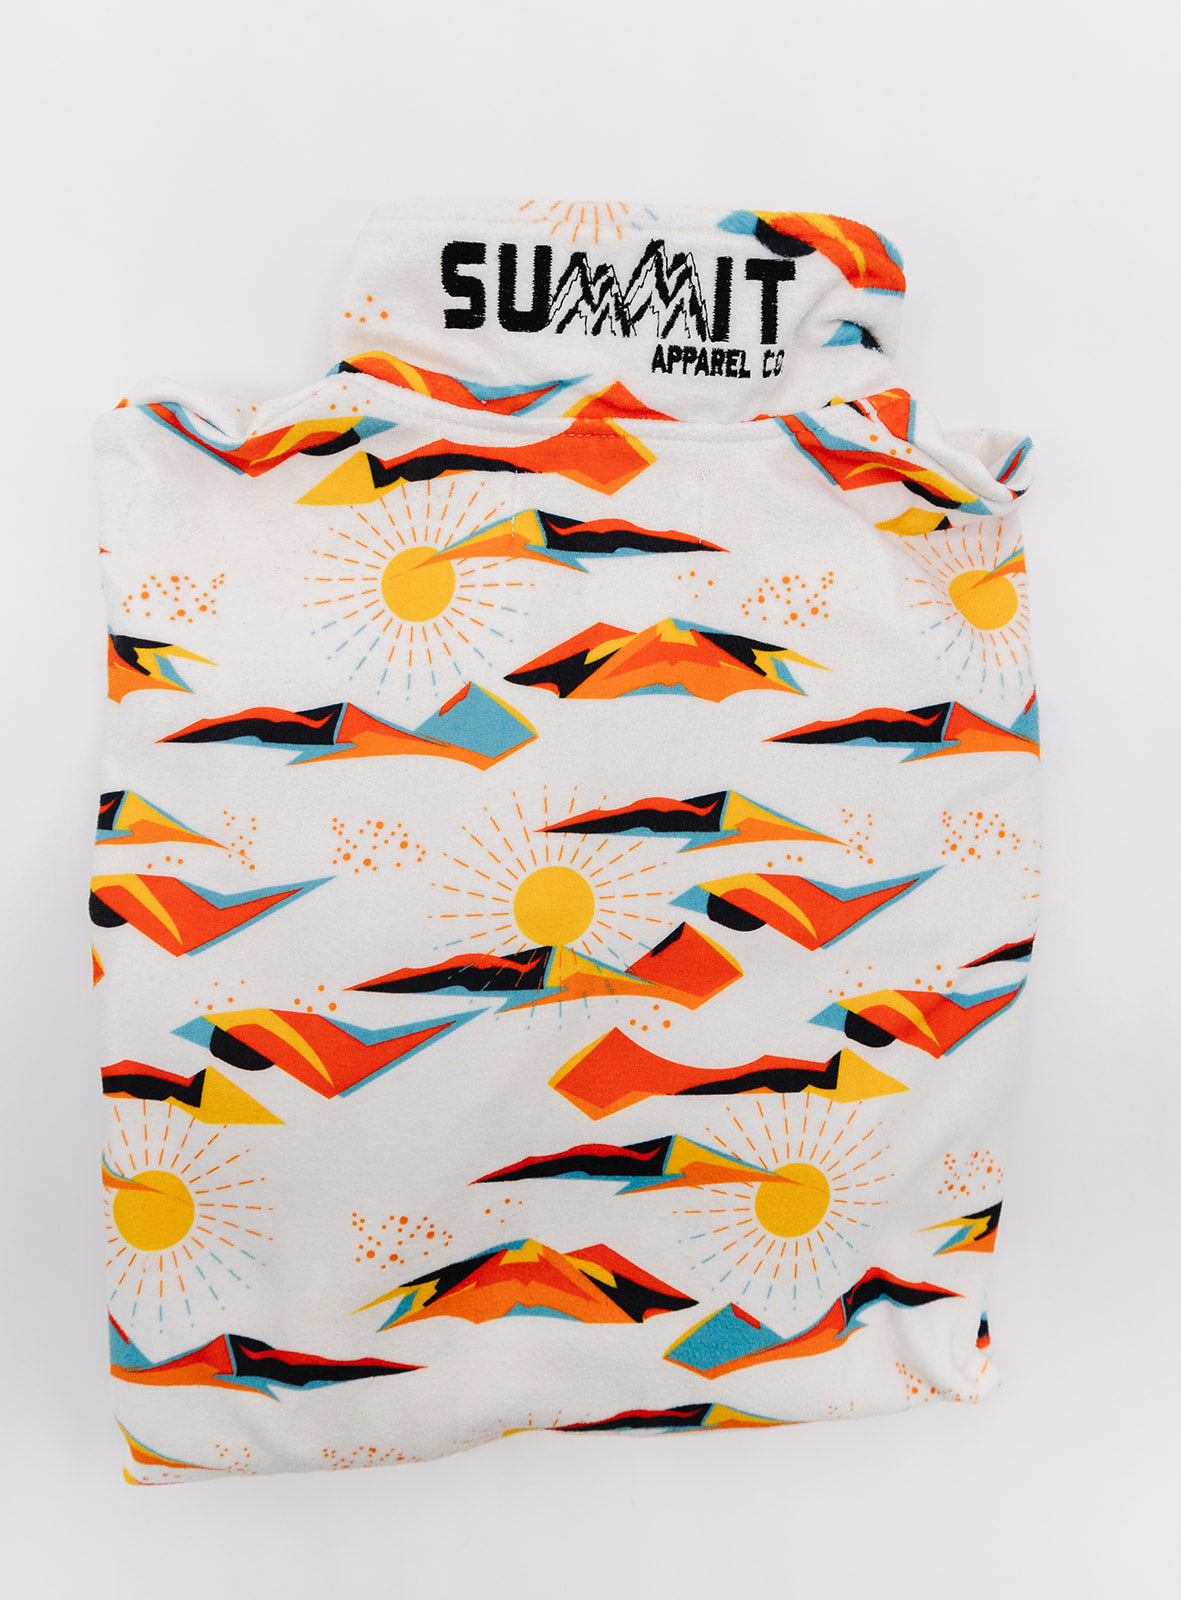 Sunset in the rockies – SUMMIT Apparel Co.